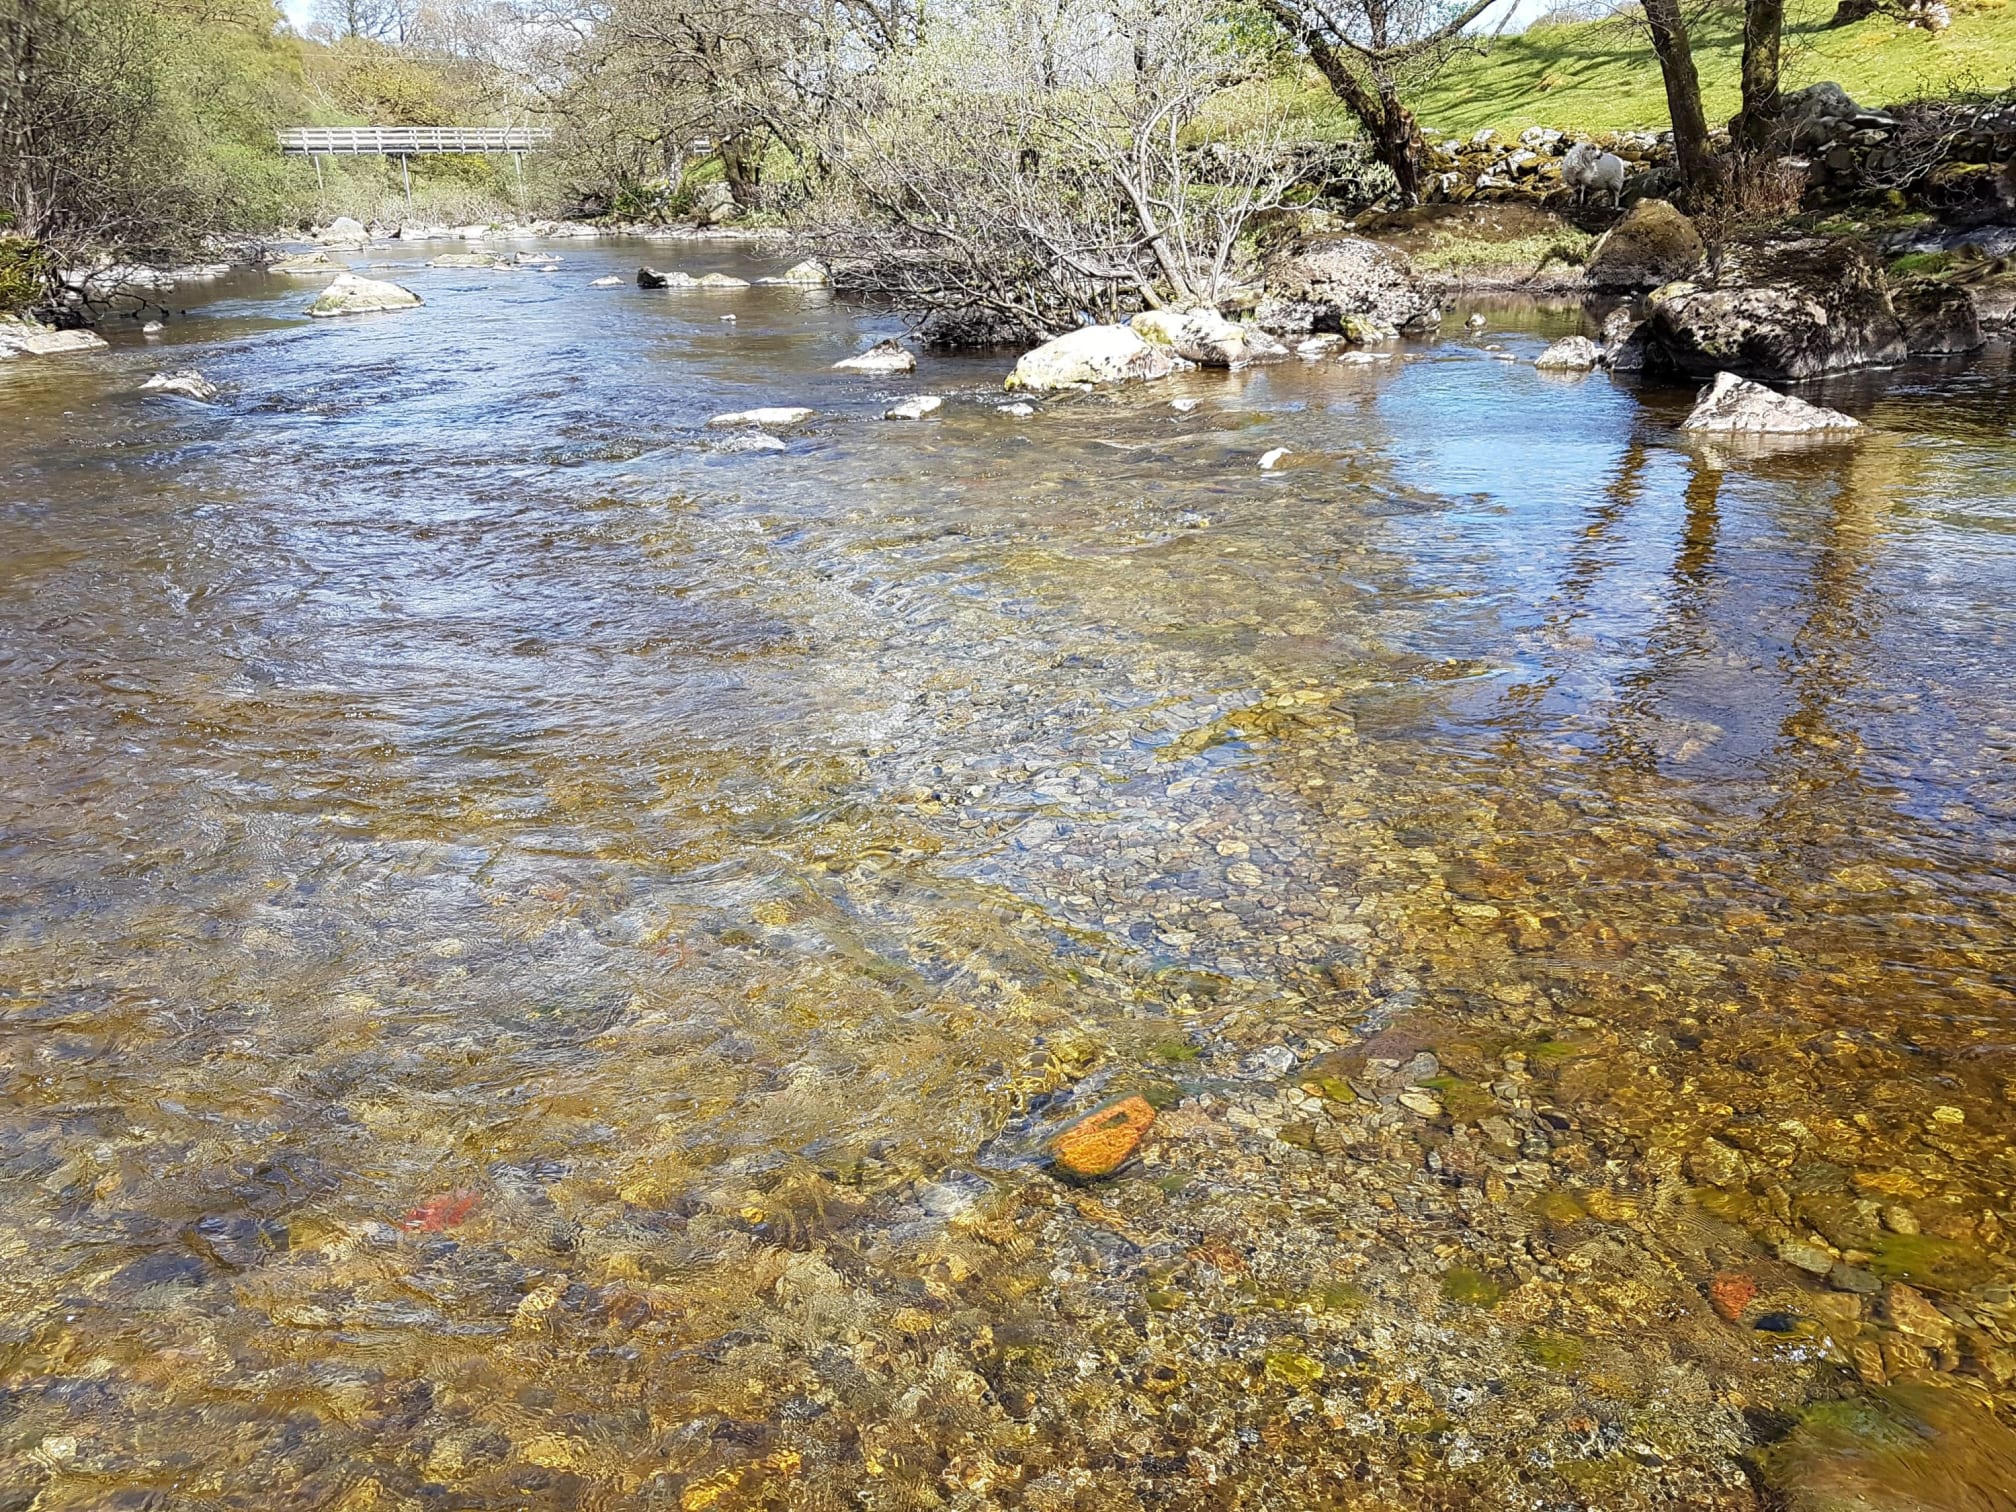 Newly introduced gravel in the Elan. The river is producing considerably more juvenile salmon and trout since the gravel introductions started in 2016